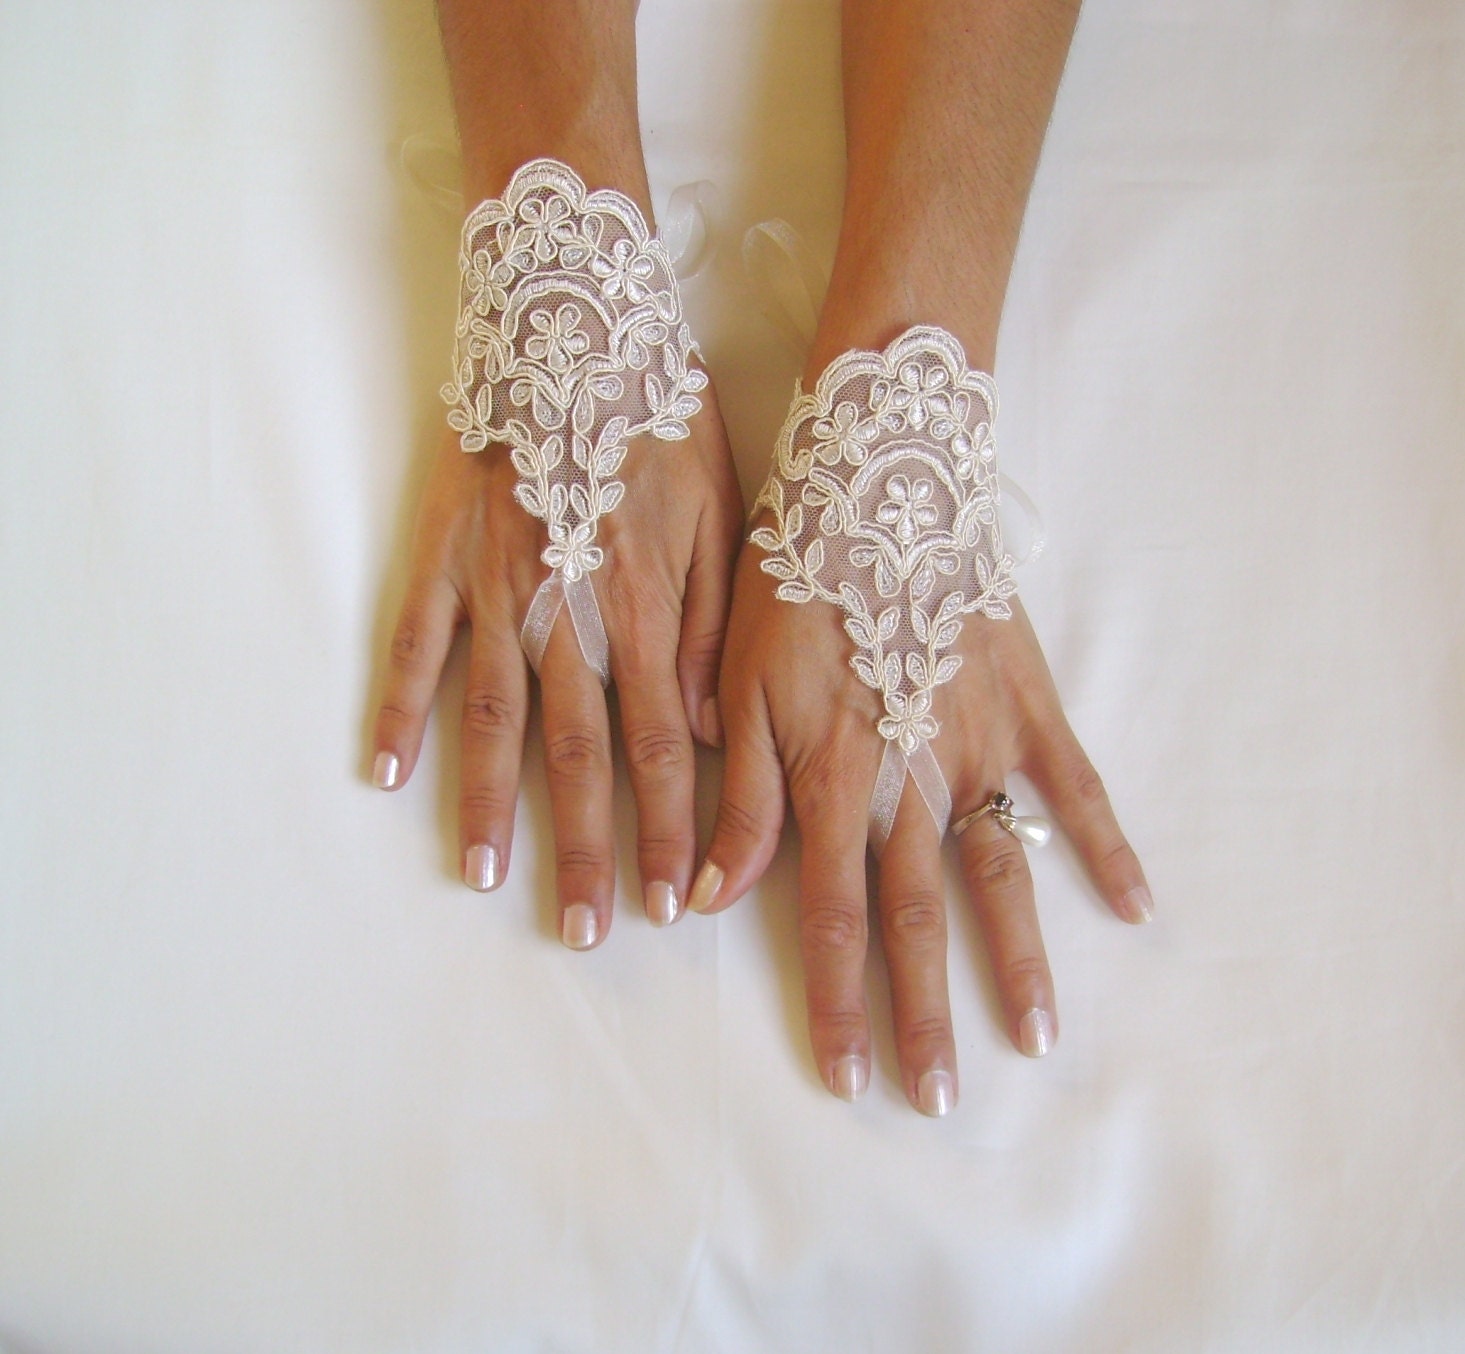 champagne lace gloves